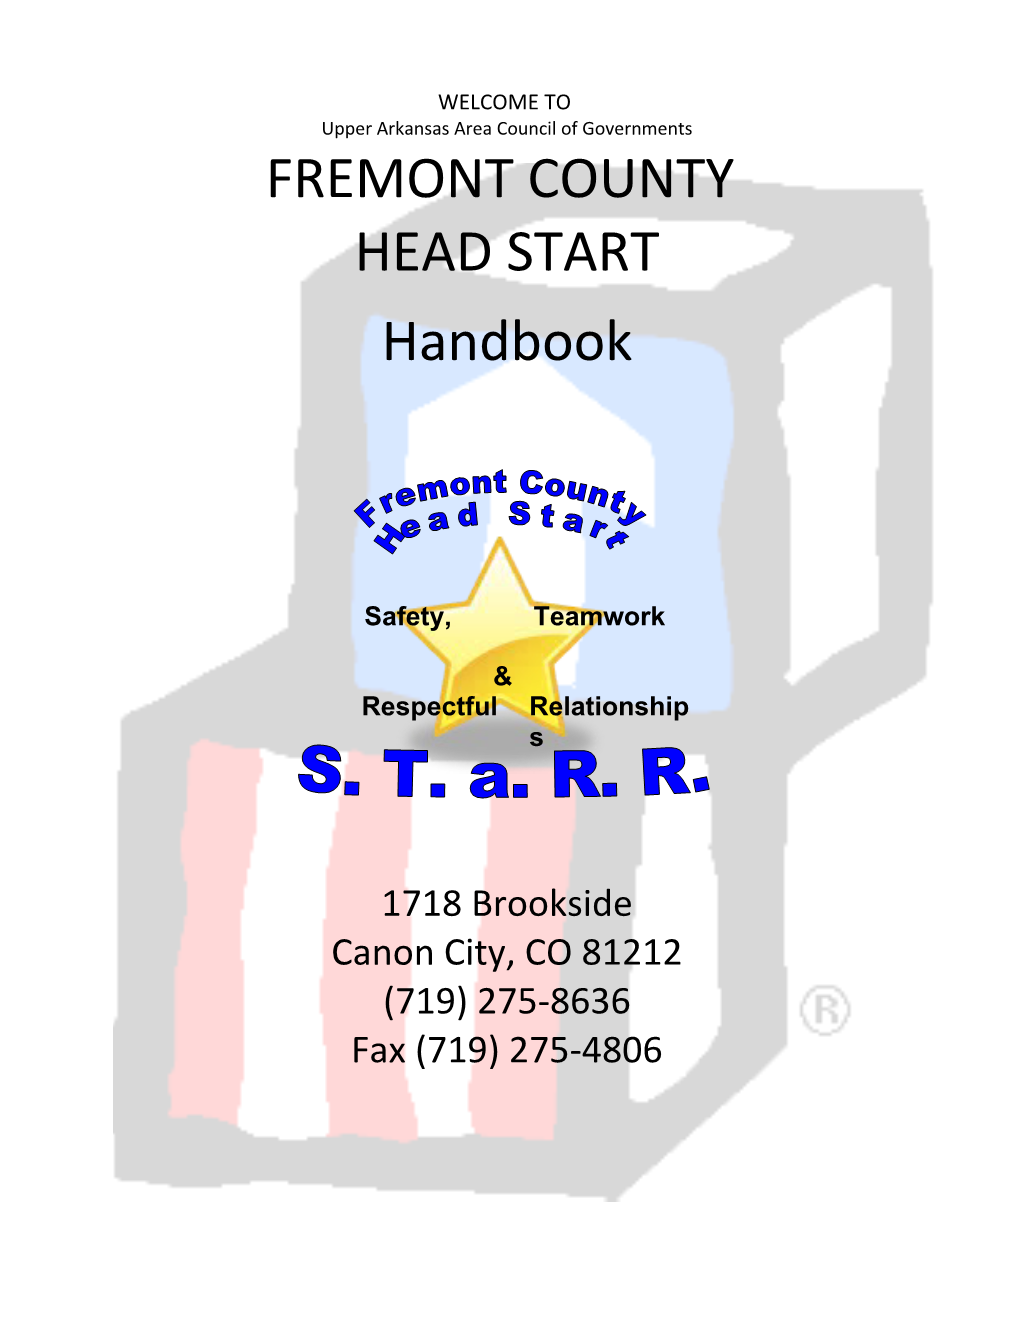 Fremont County Head Start Phone Number: 275-8636